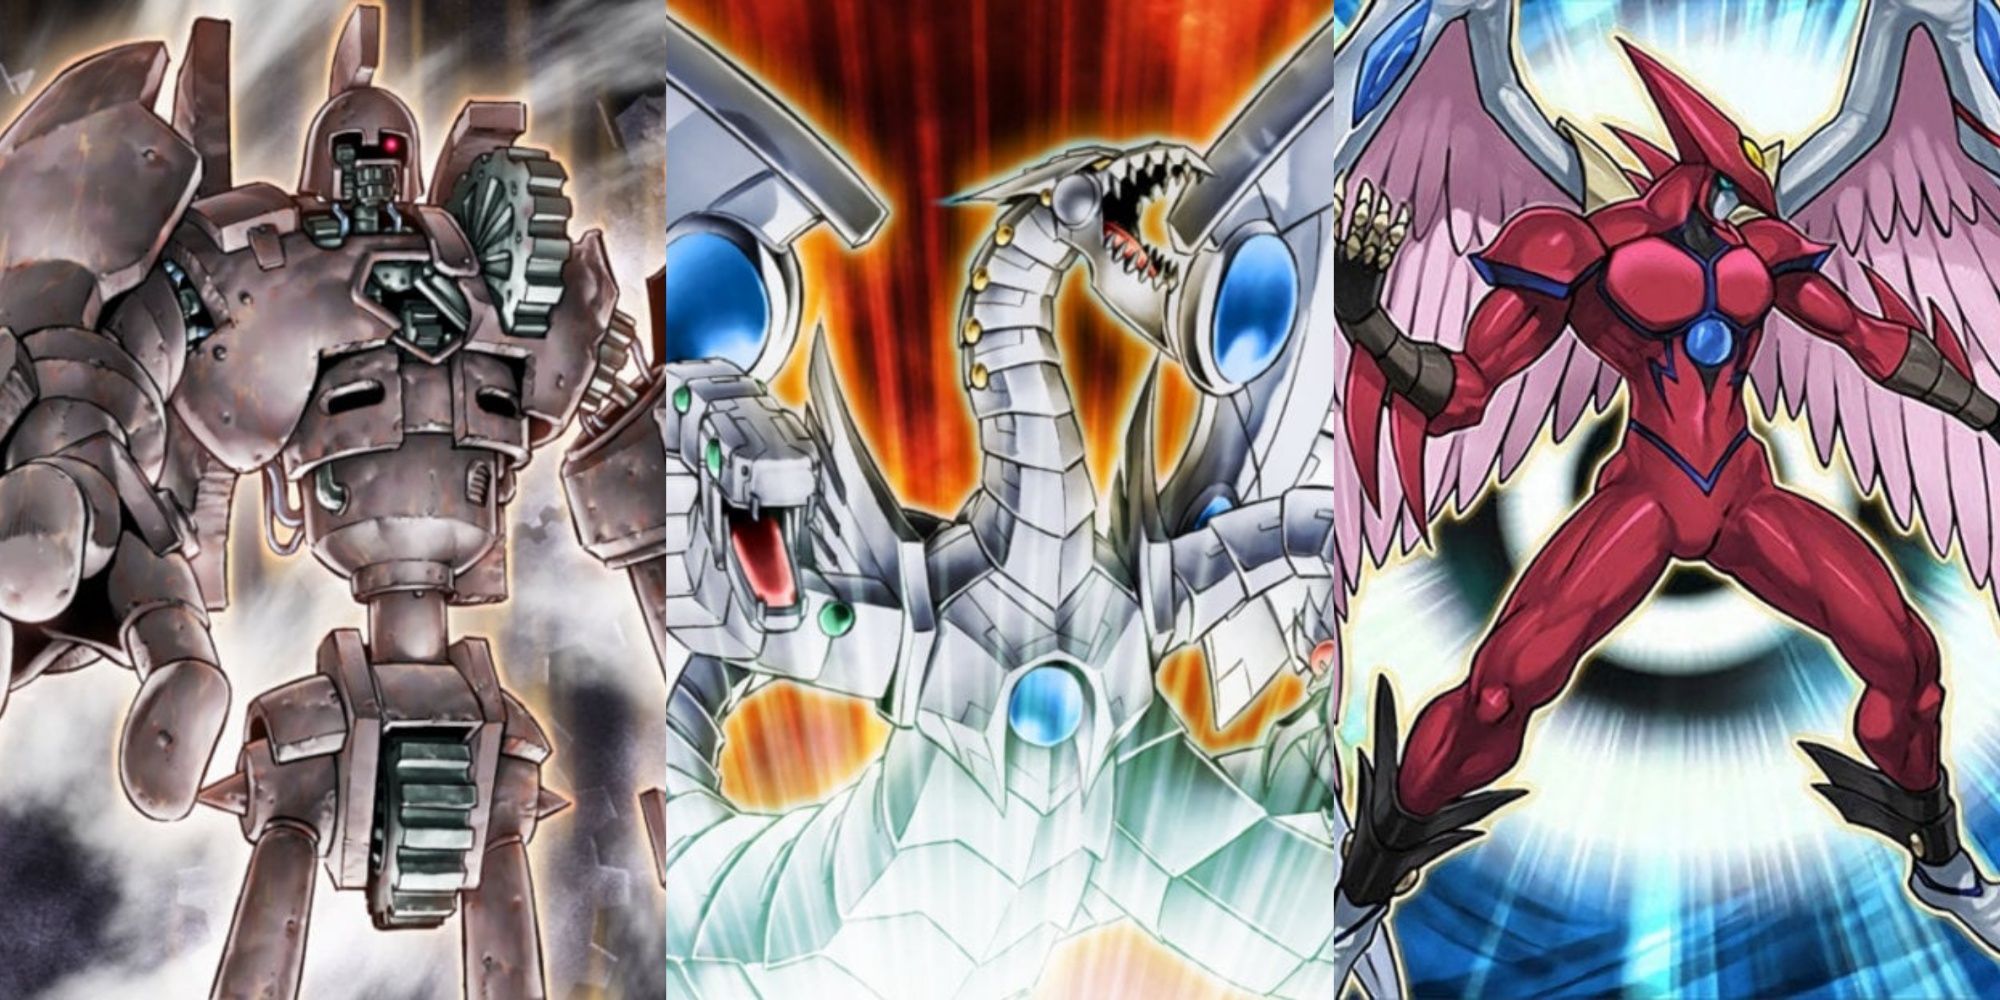 Card artworks for Ancient Gear Golem, Cyber End Dragon, and Elemental Hero Air Neos in Yu-Gi-Oh!